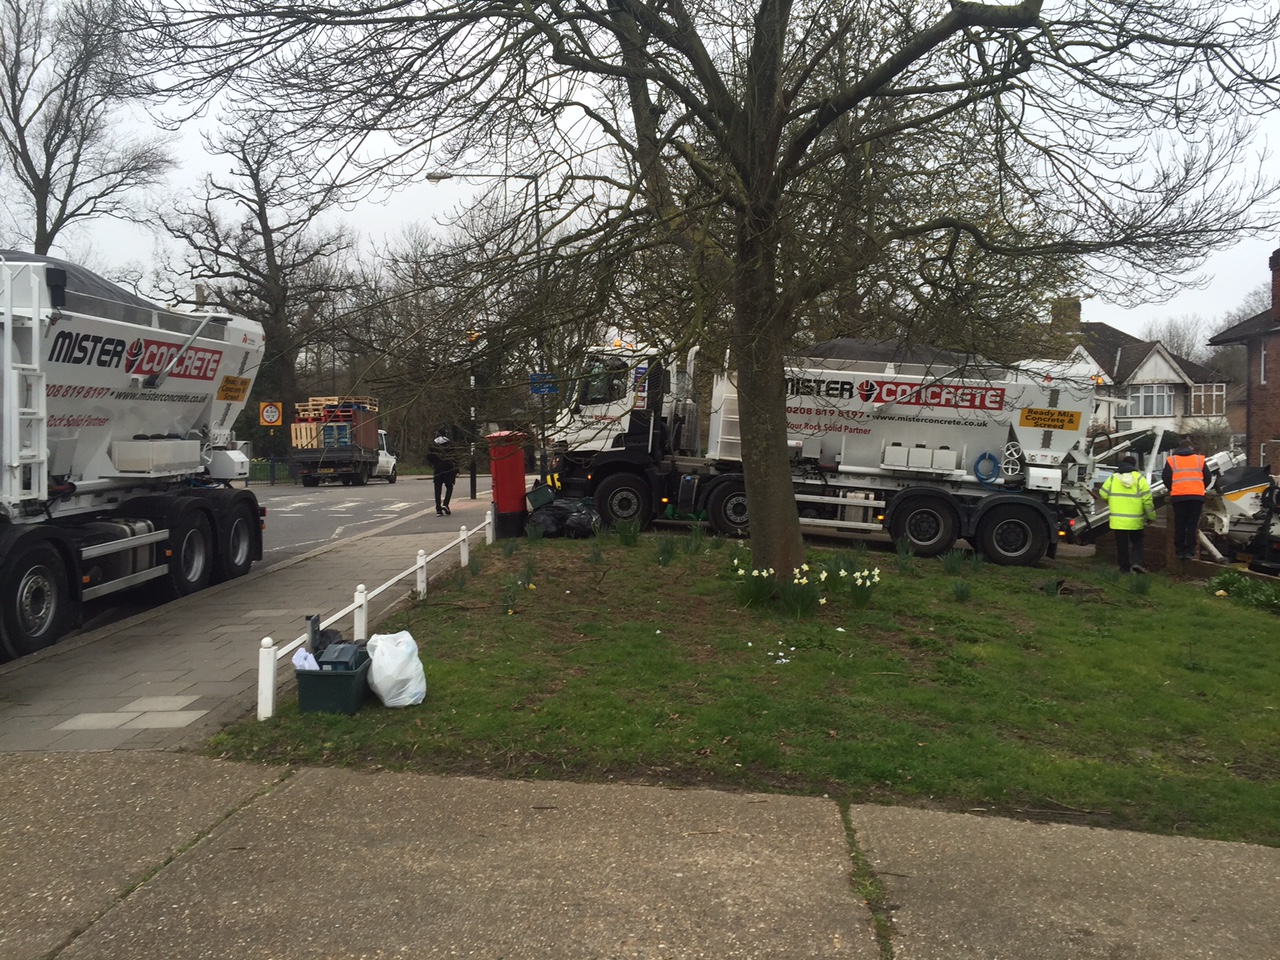 Busy weekend delivering concrete in Sutton